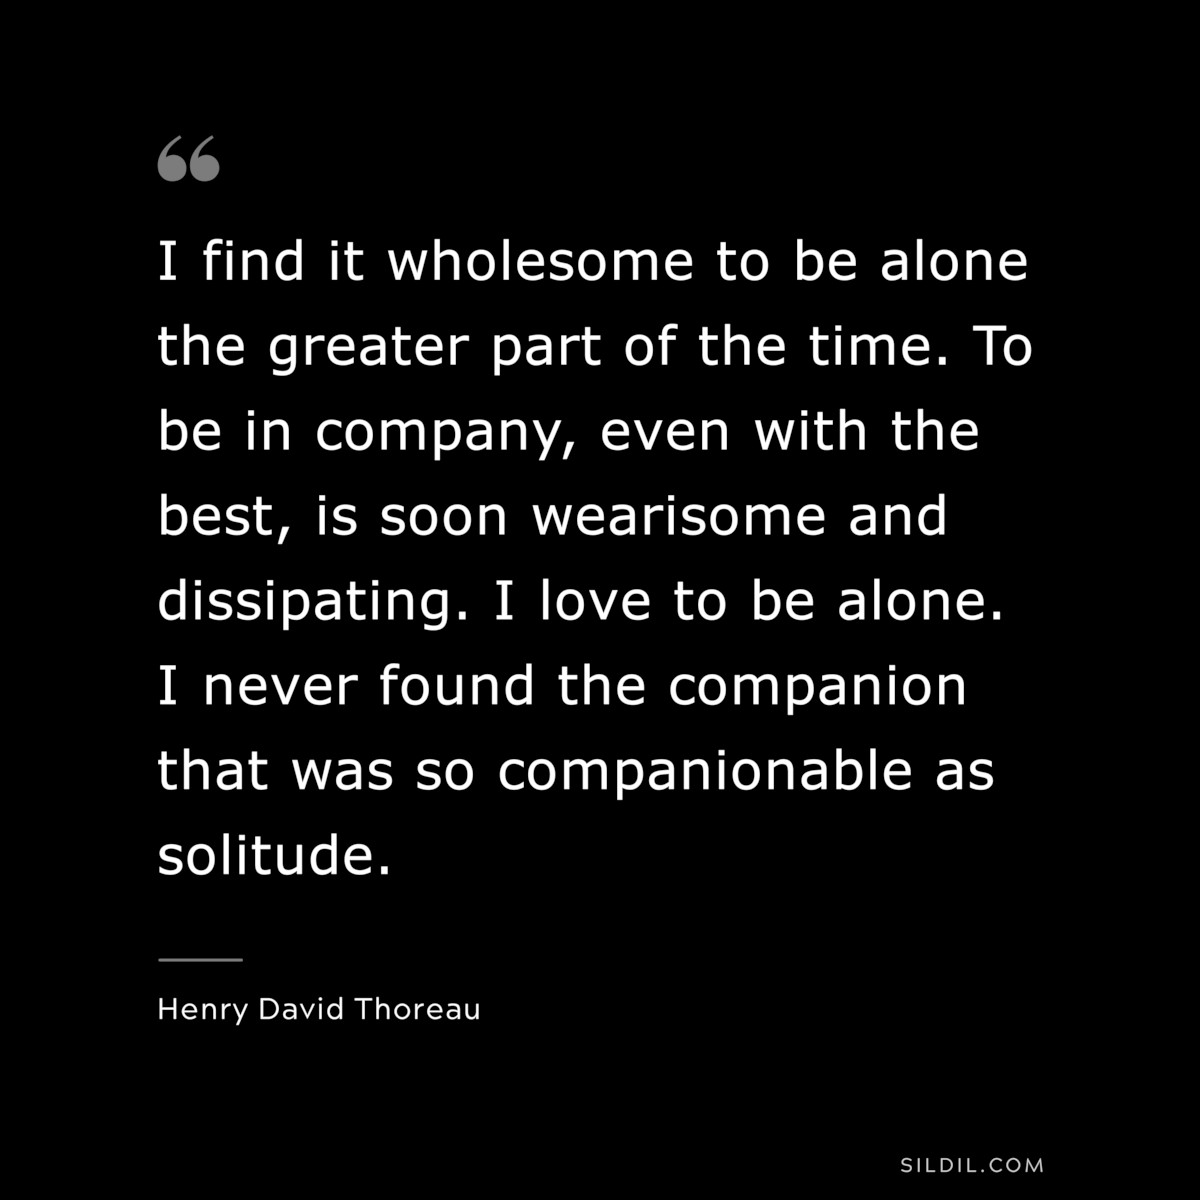 I find it wholesome to be alone the greater part of the time. To be in company, even with the best, is soon wearisome and dissipating. I love to be alone. I never found the companion that was so companionable as solitude. — Henry David Thoreau